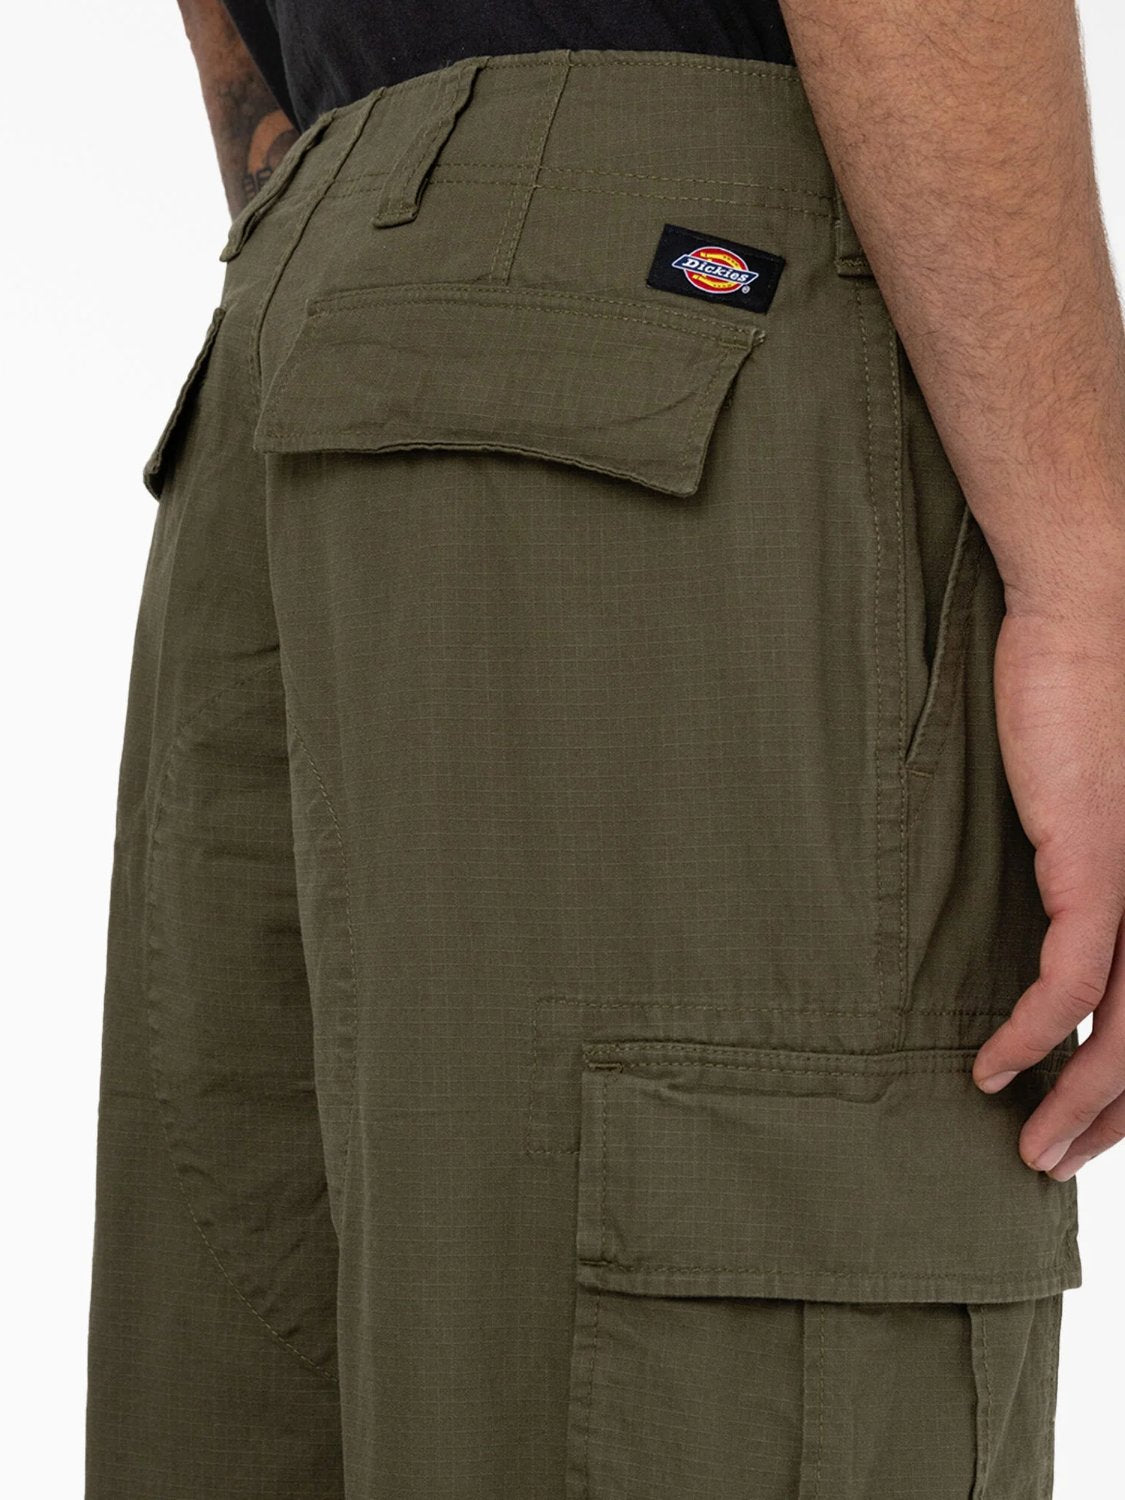 DICKIES EAGLE BEND RELAXED FIT DOUBLE KNEE CARGO PANT MILITARY GREEN